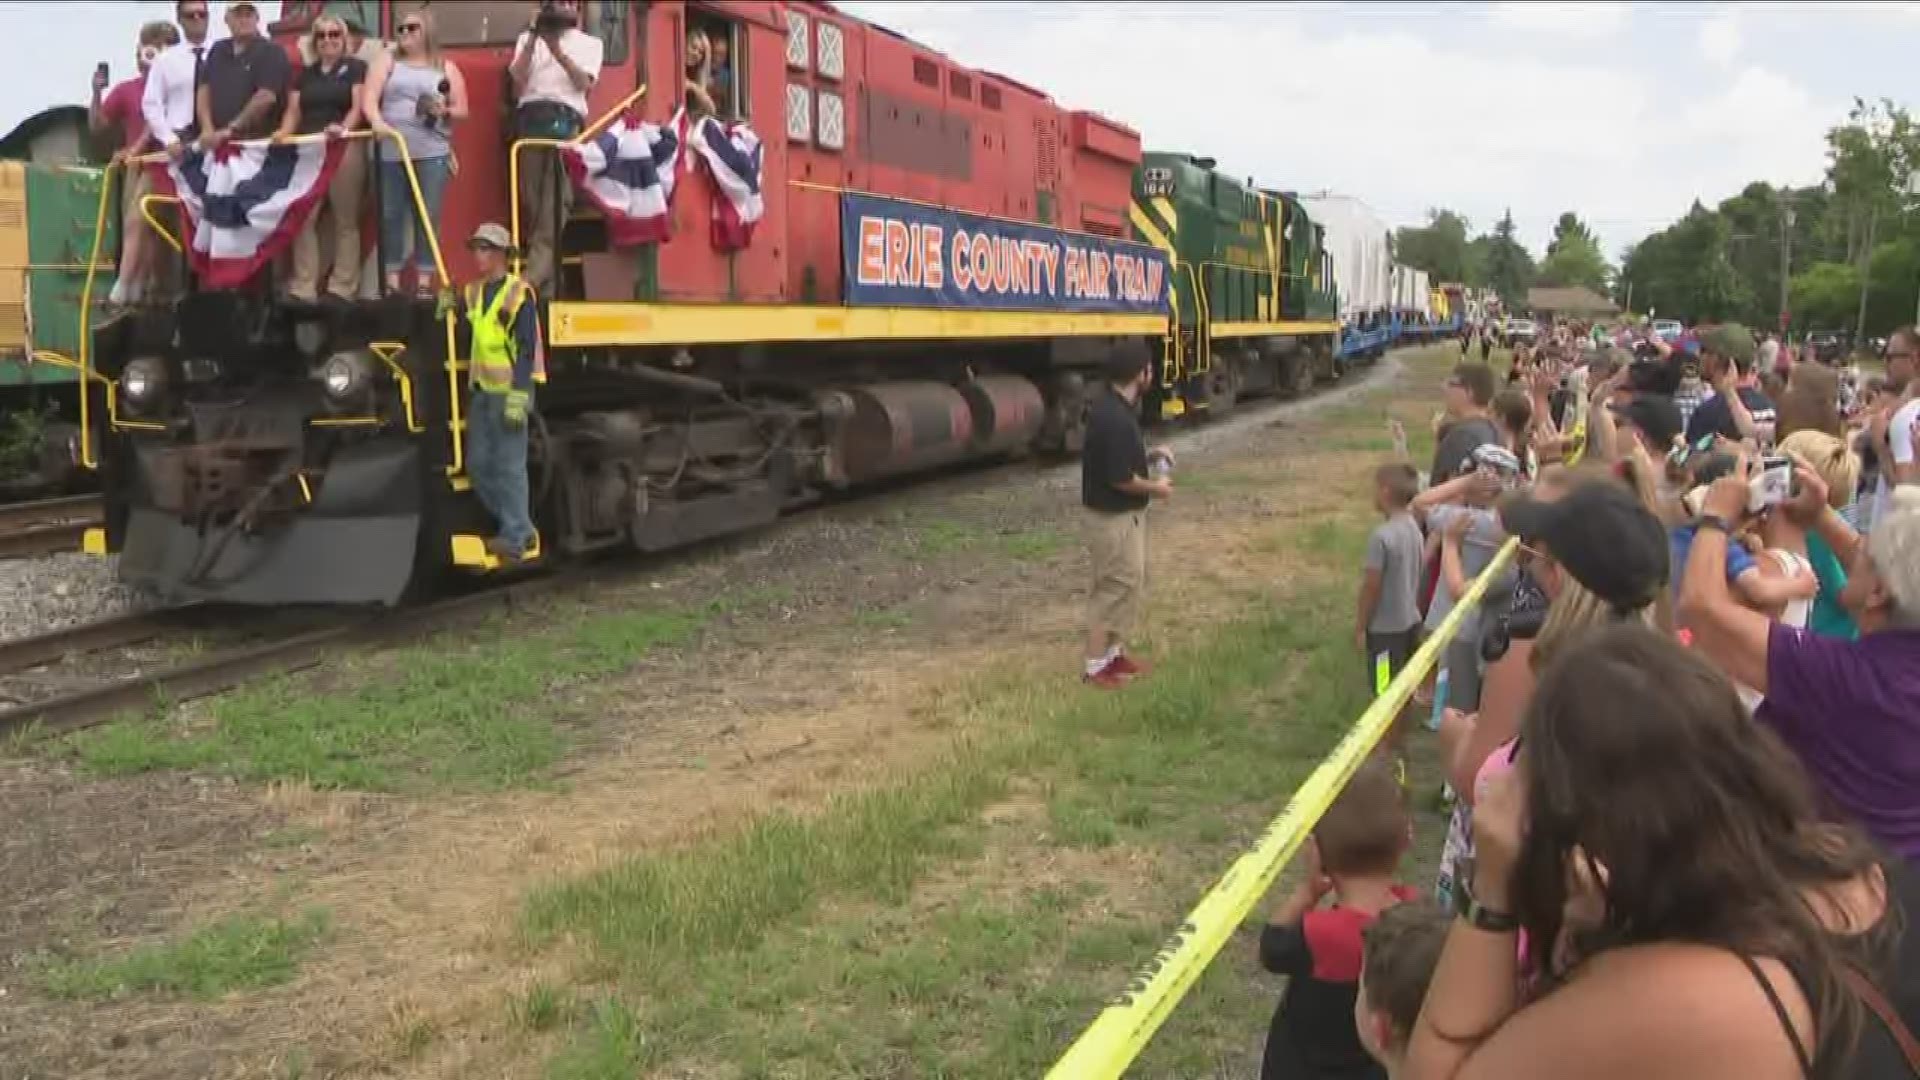 This fifty-car train brings most of carnival rides for the fair that starts next week.